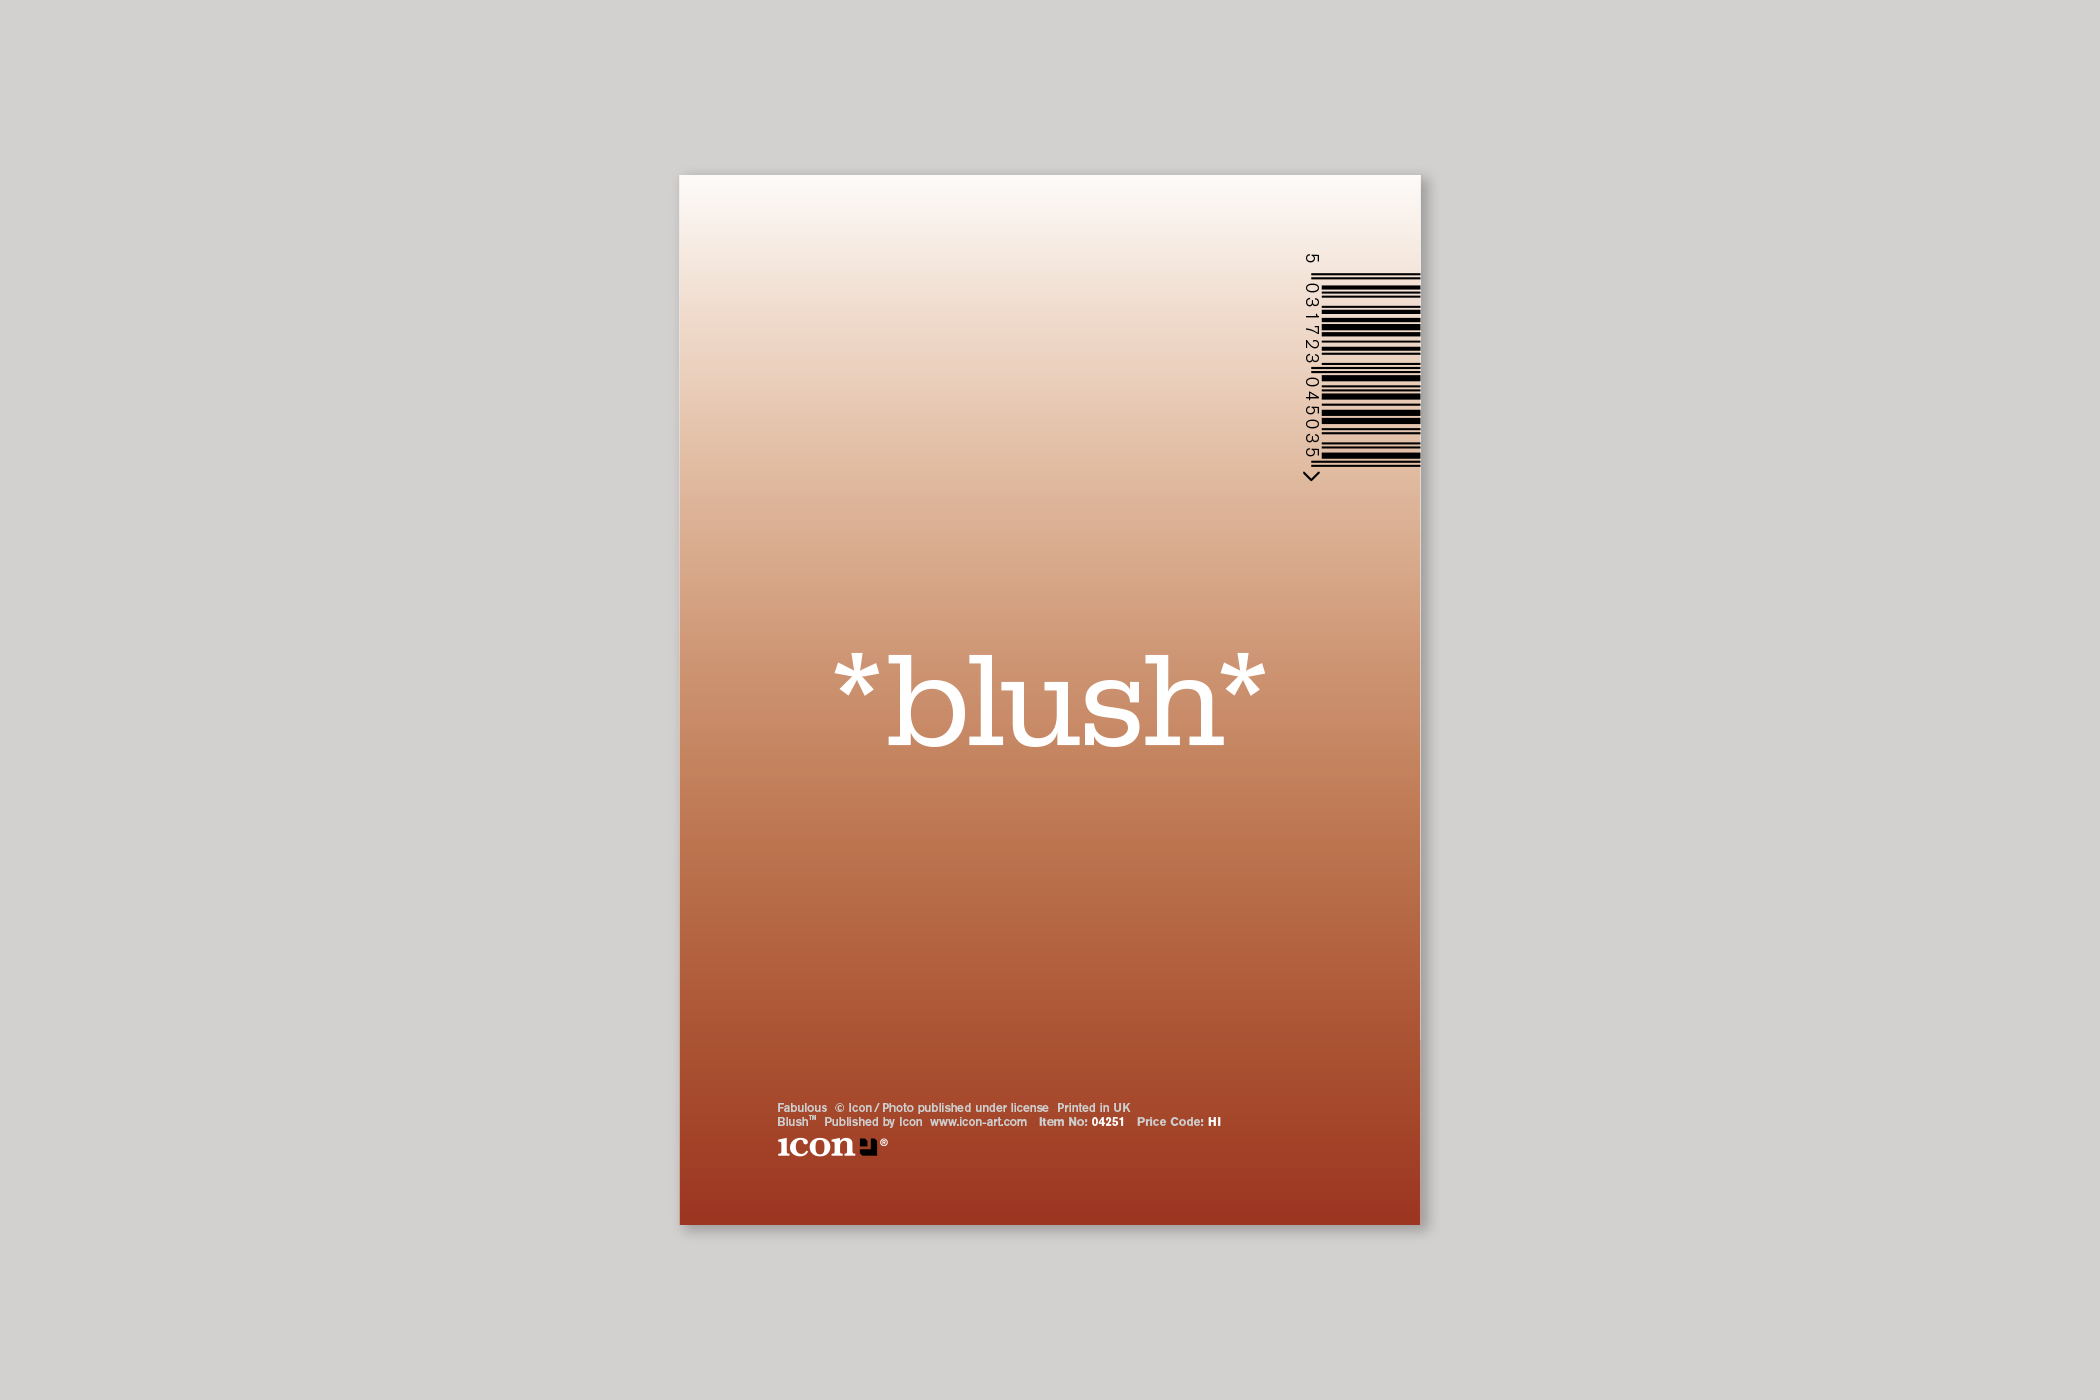 Fabulous from Blush humour range of greeting cards by Icon, with envelope.